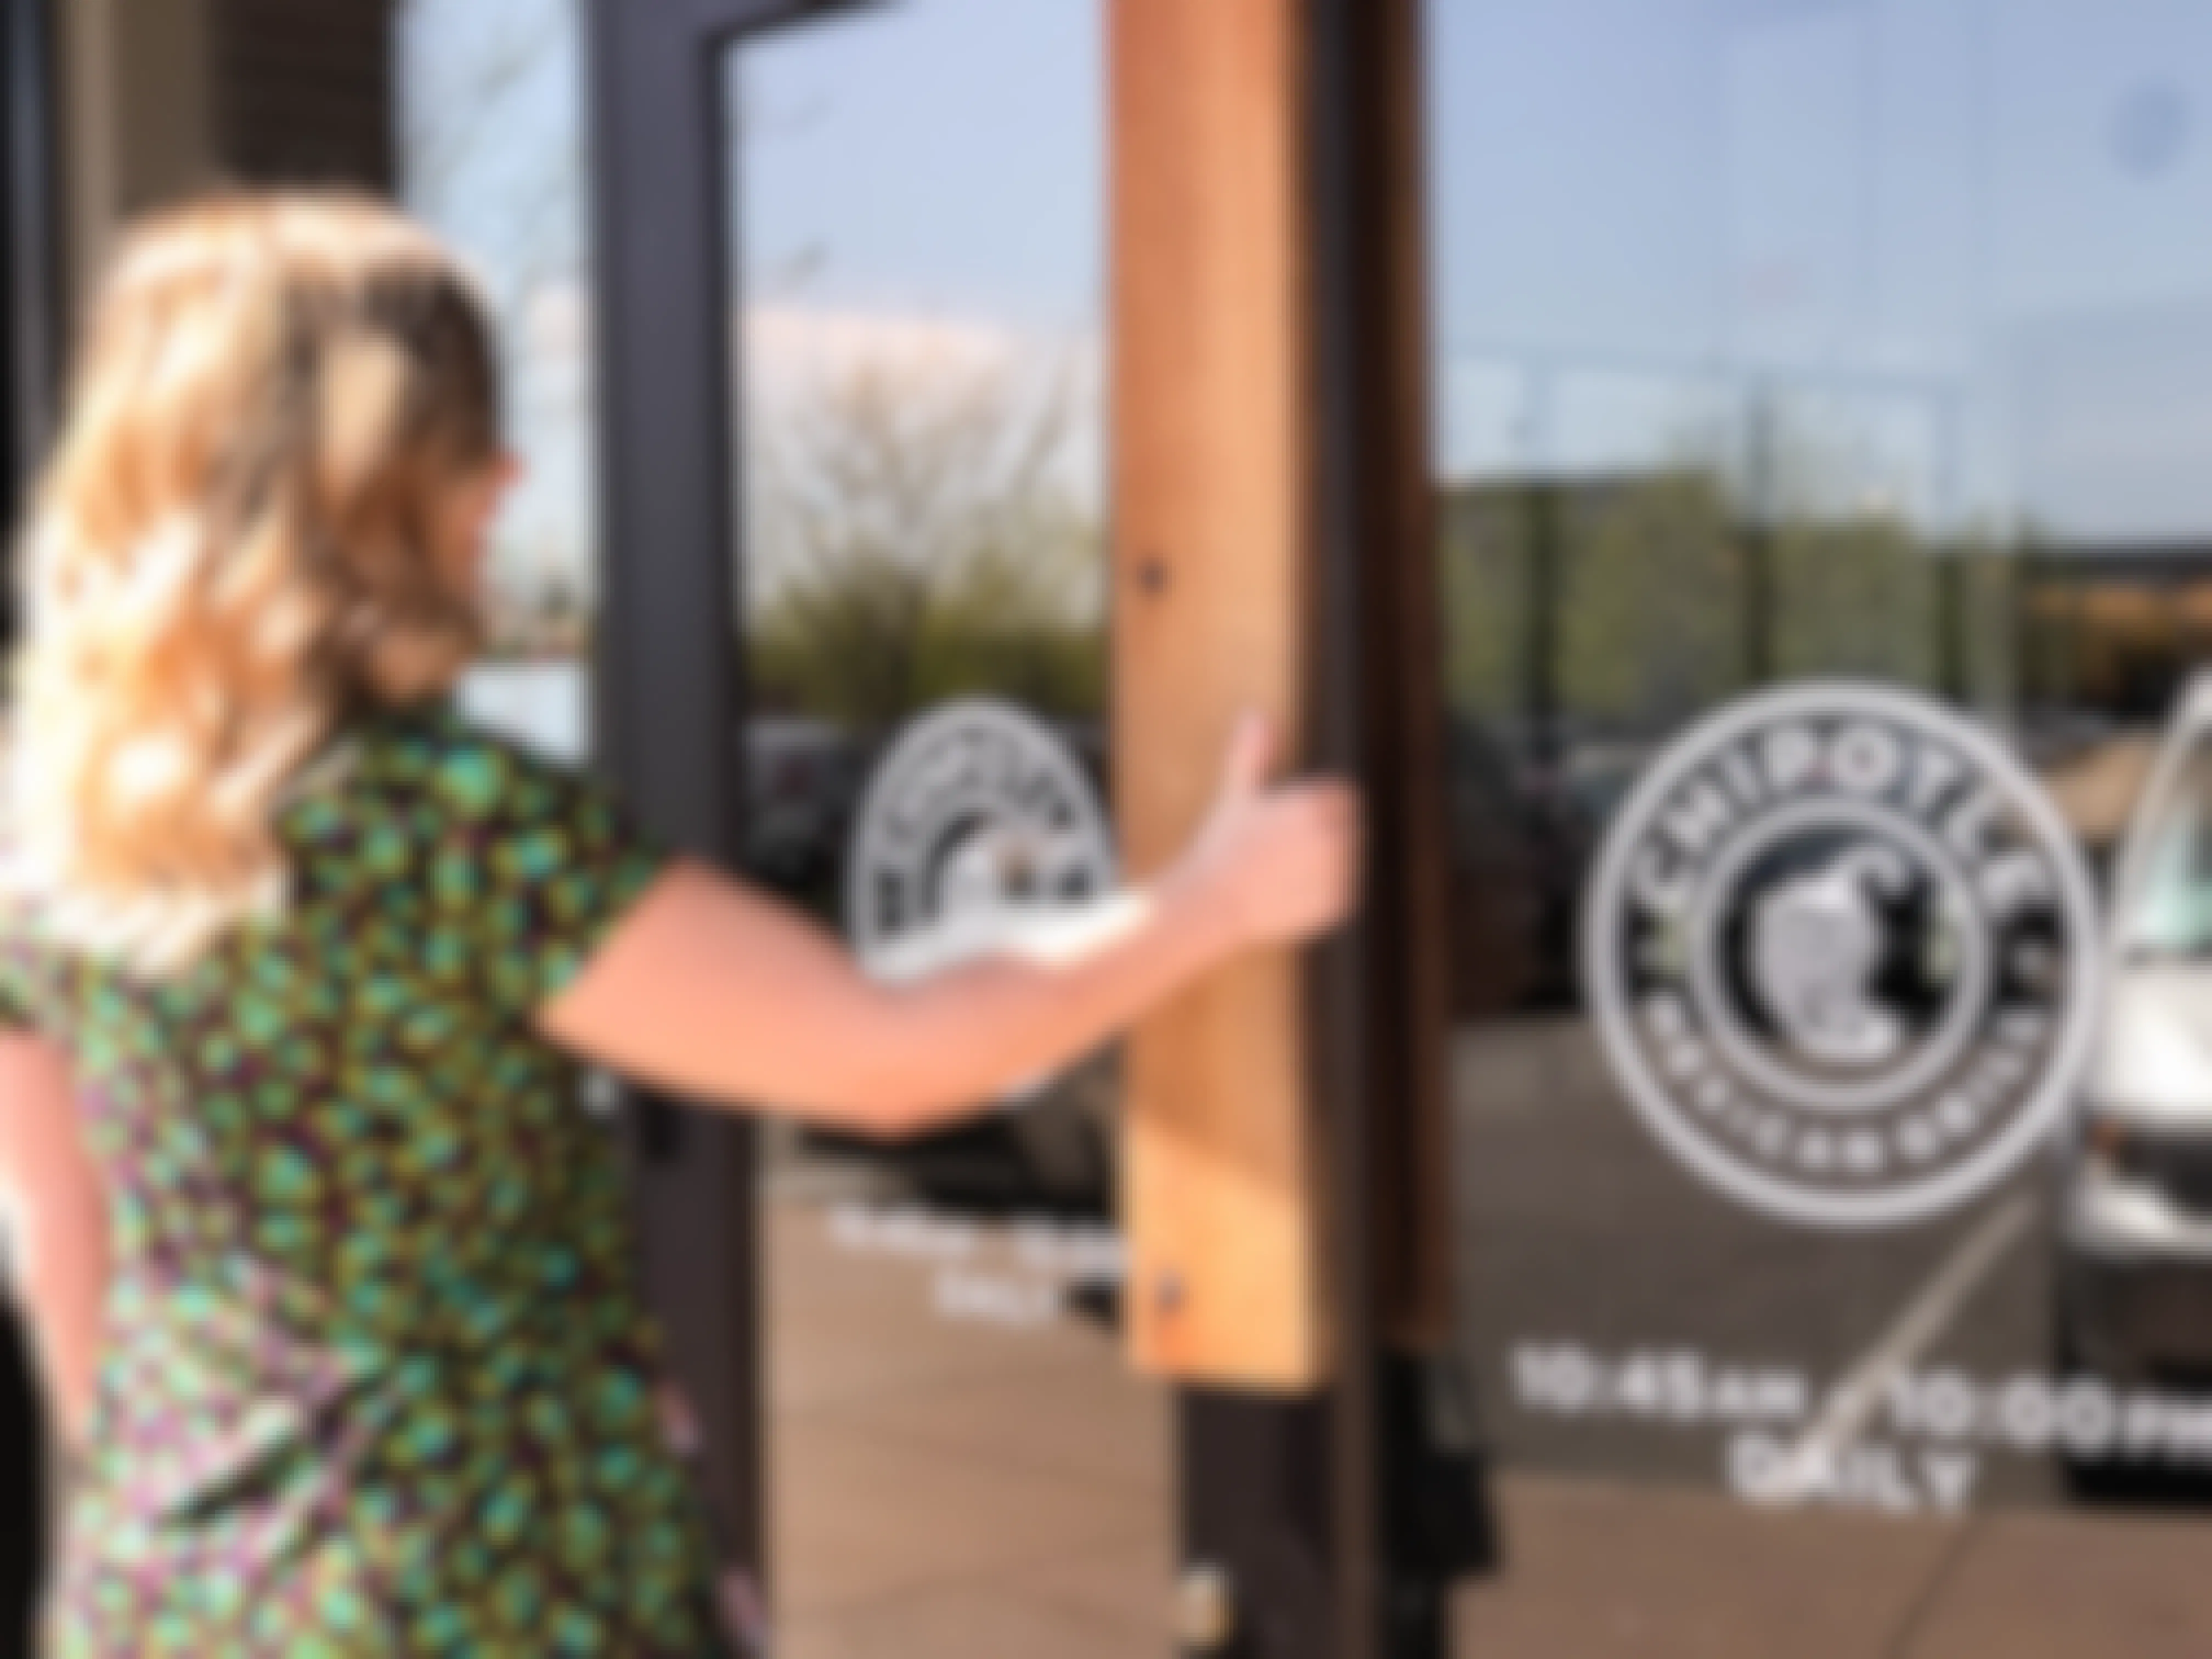 Woman opening the door to Chipotle, which she'll be able to do because it's one of the restaurants open on 4th of July